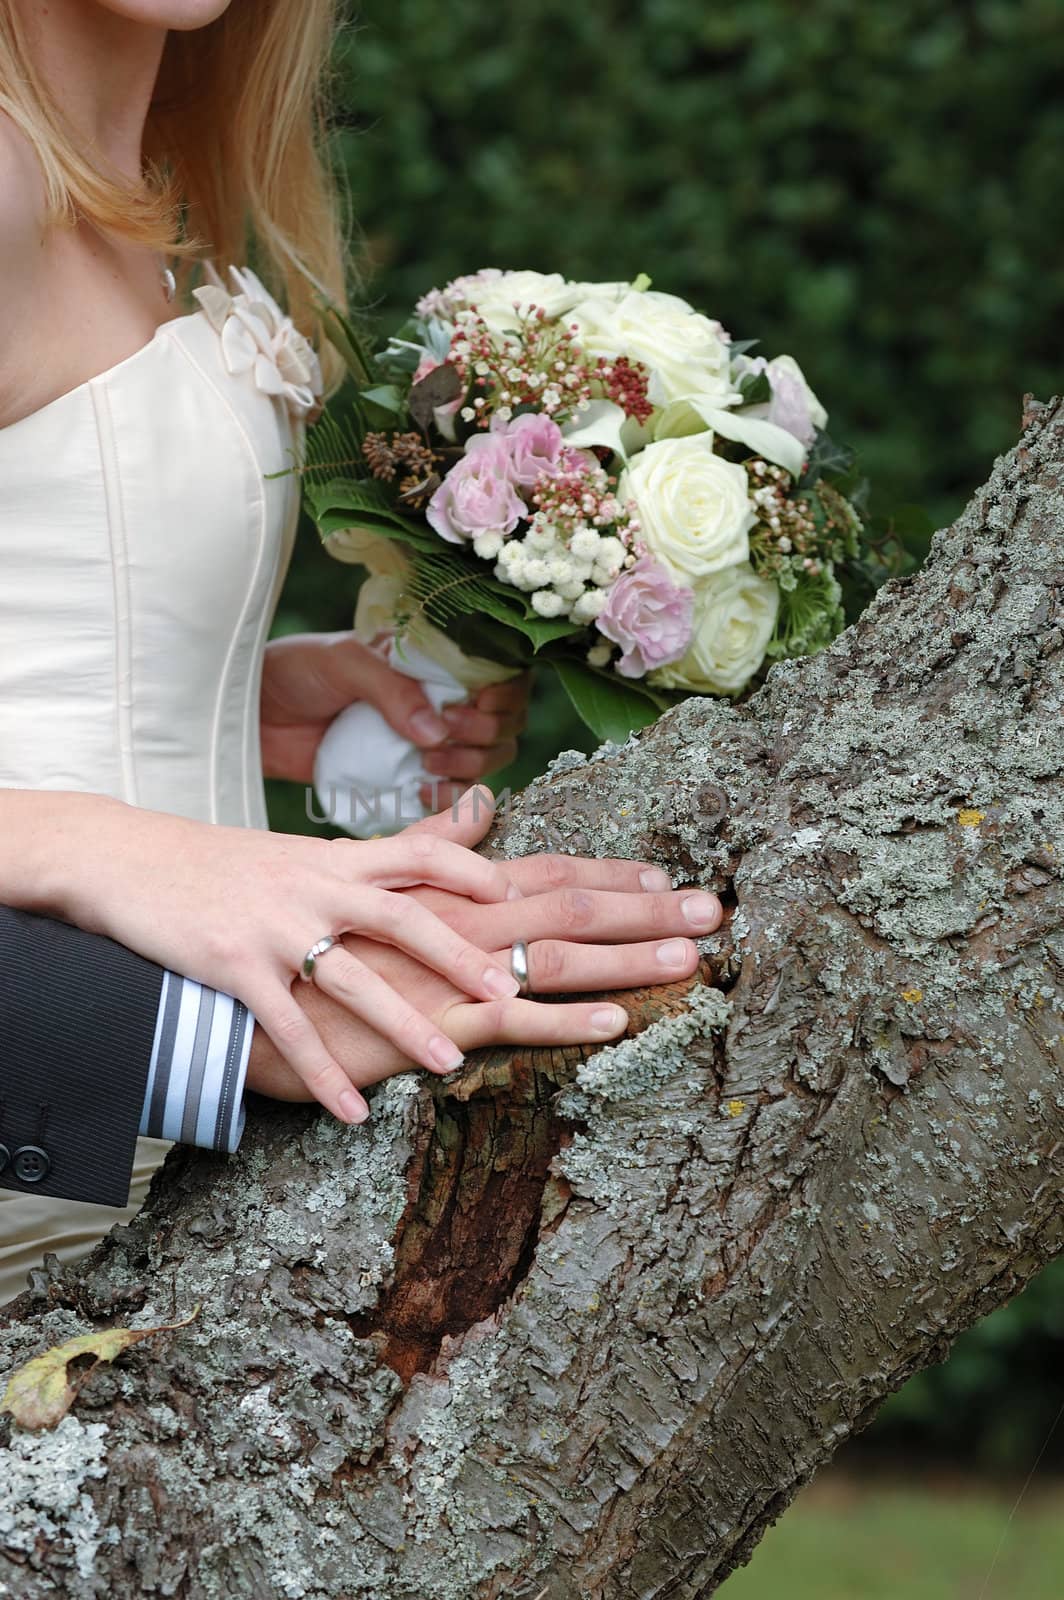 Hands, rings and bouquet by cfoto